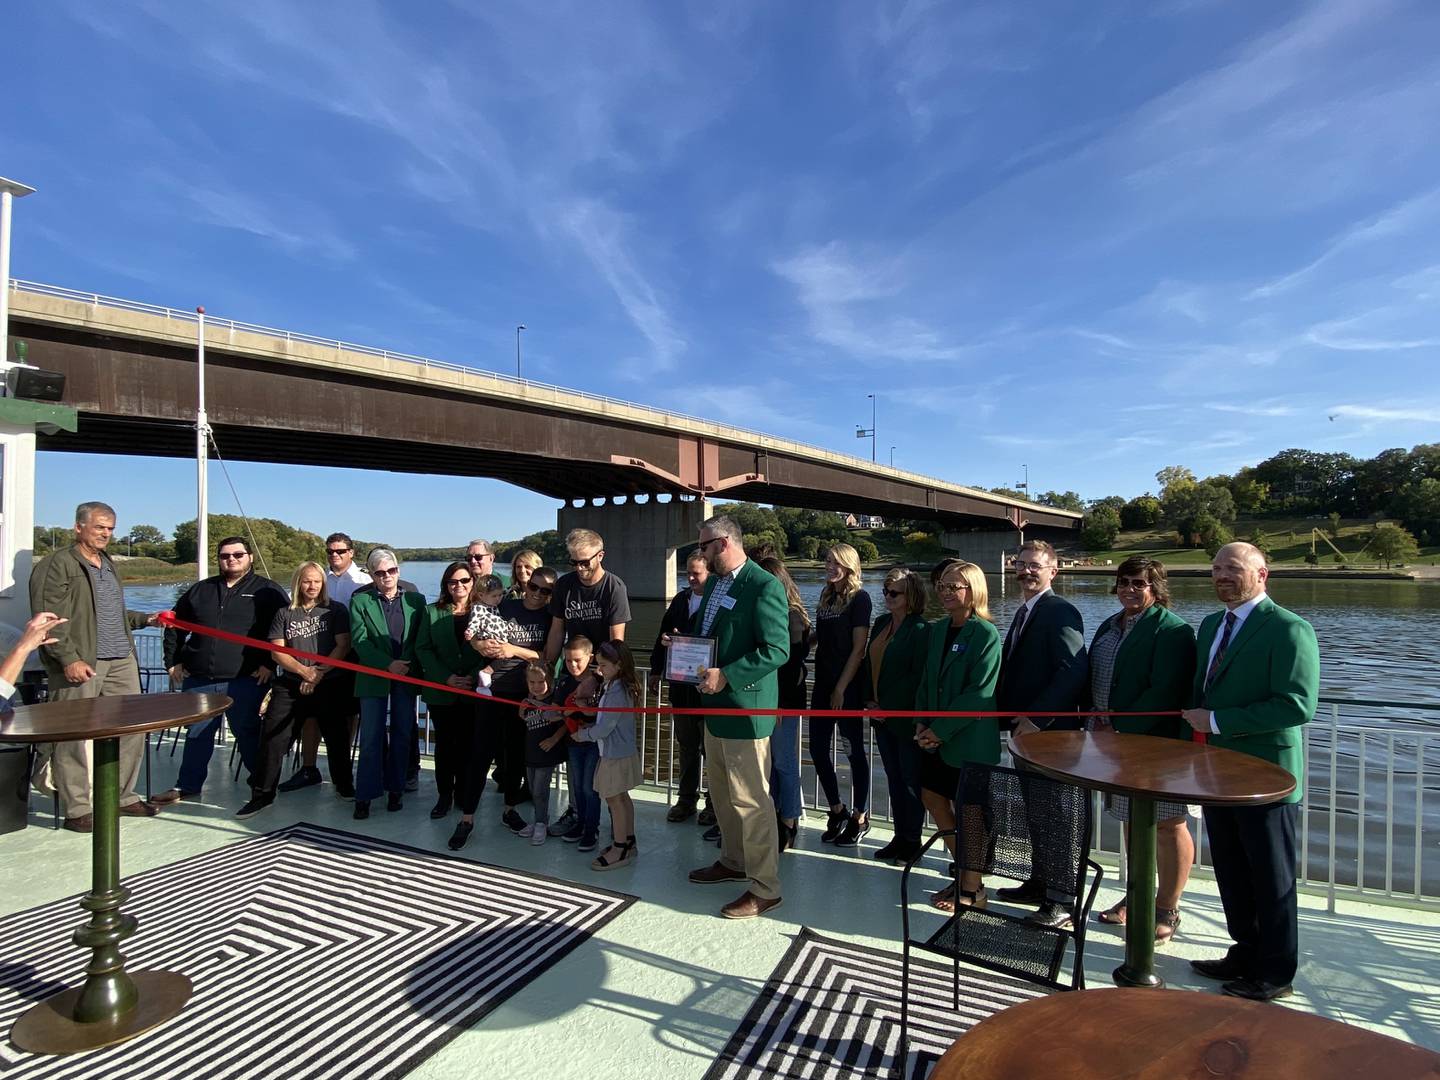 The Ottawa Area Chamber of Commerce and Industry ambassadors cut the ribbon on the St. Genevieve Riverboat with Gentry Nordstrom, Nathan Weiss and their families.